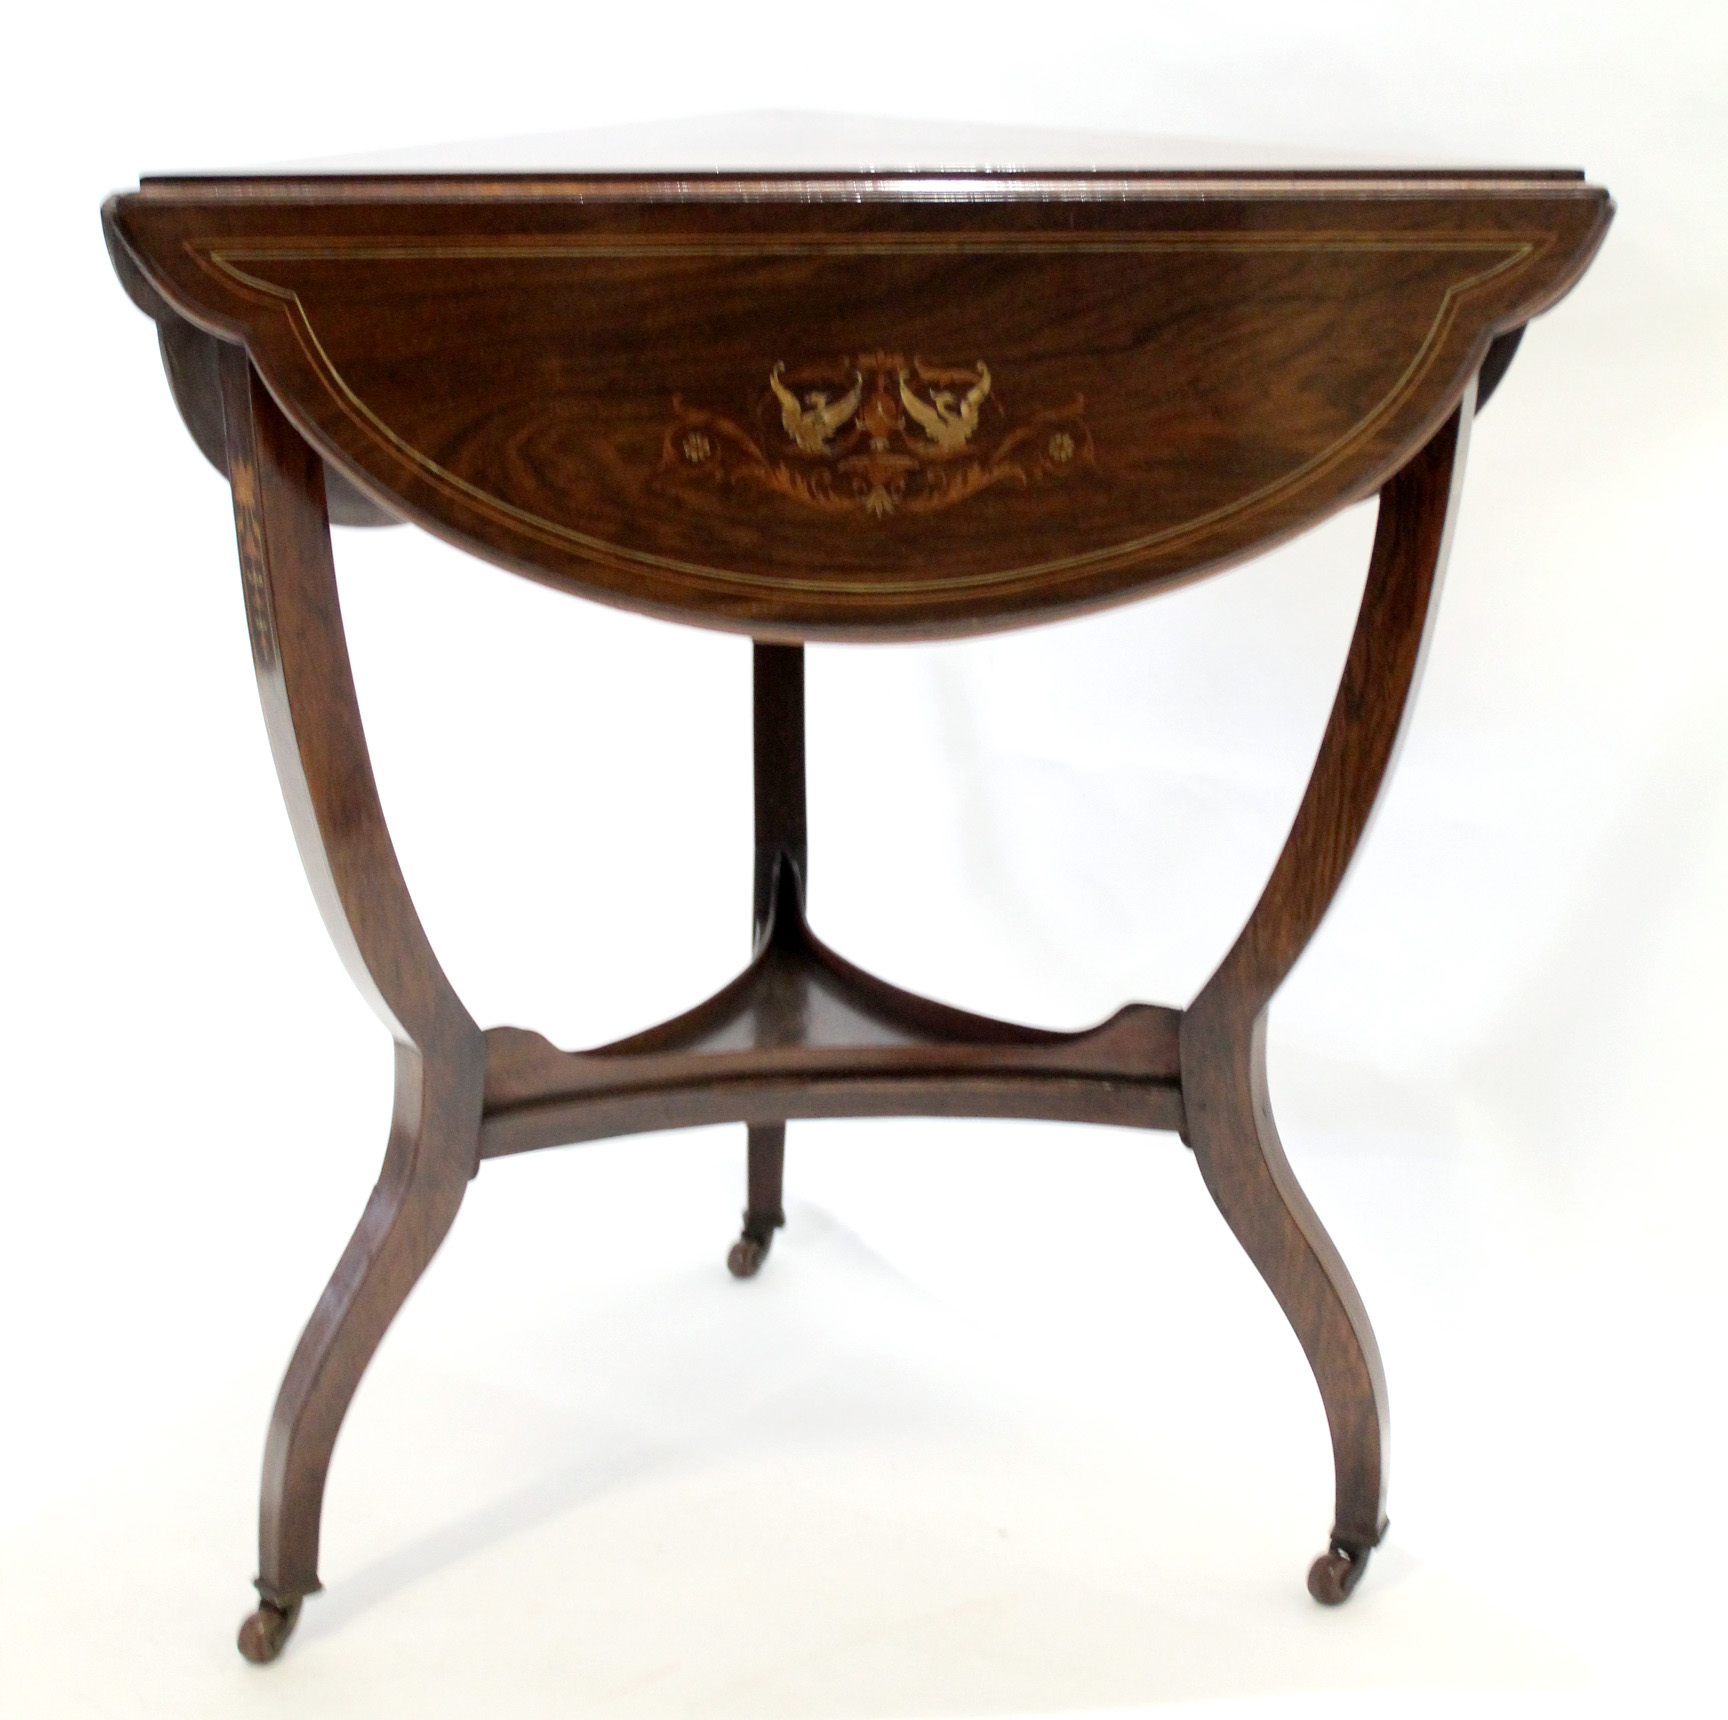 19th century rosewood and inlaid triangular occasional table with three drop flaps with open shelves - Image 3 of 3